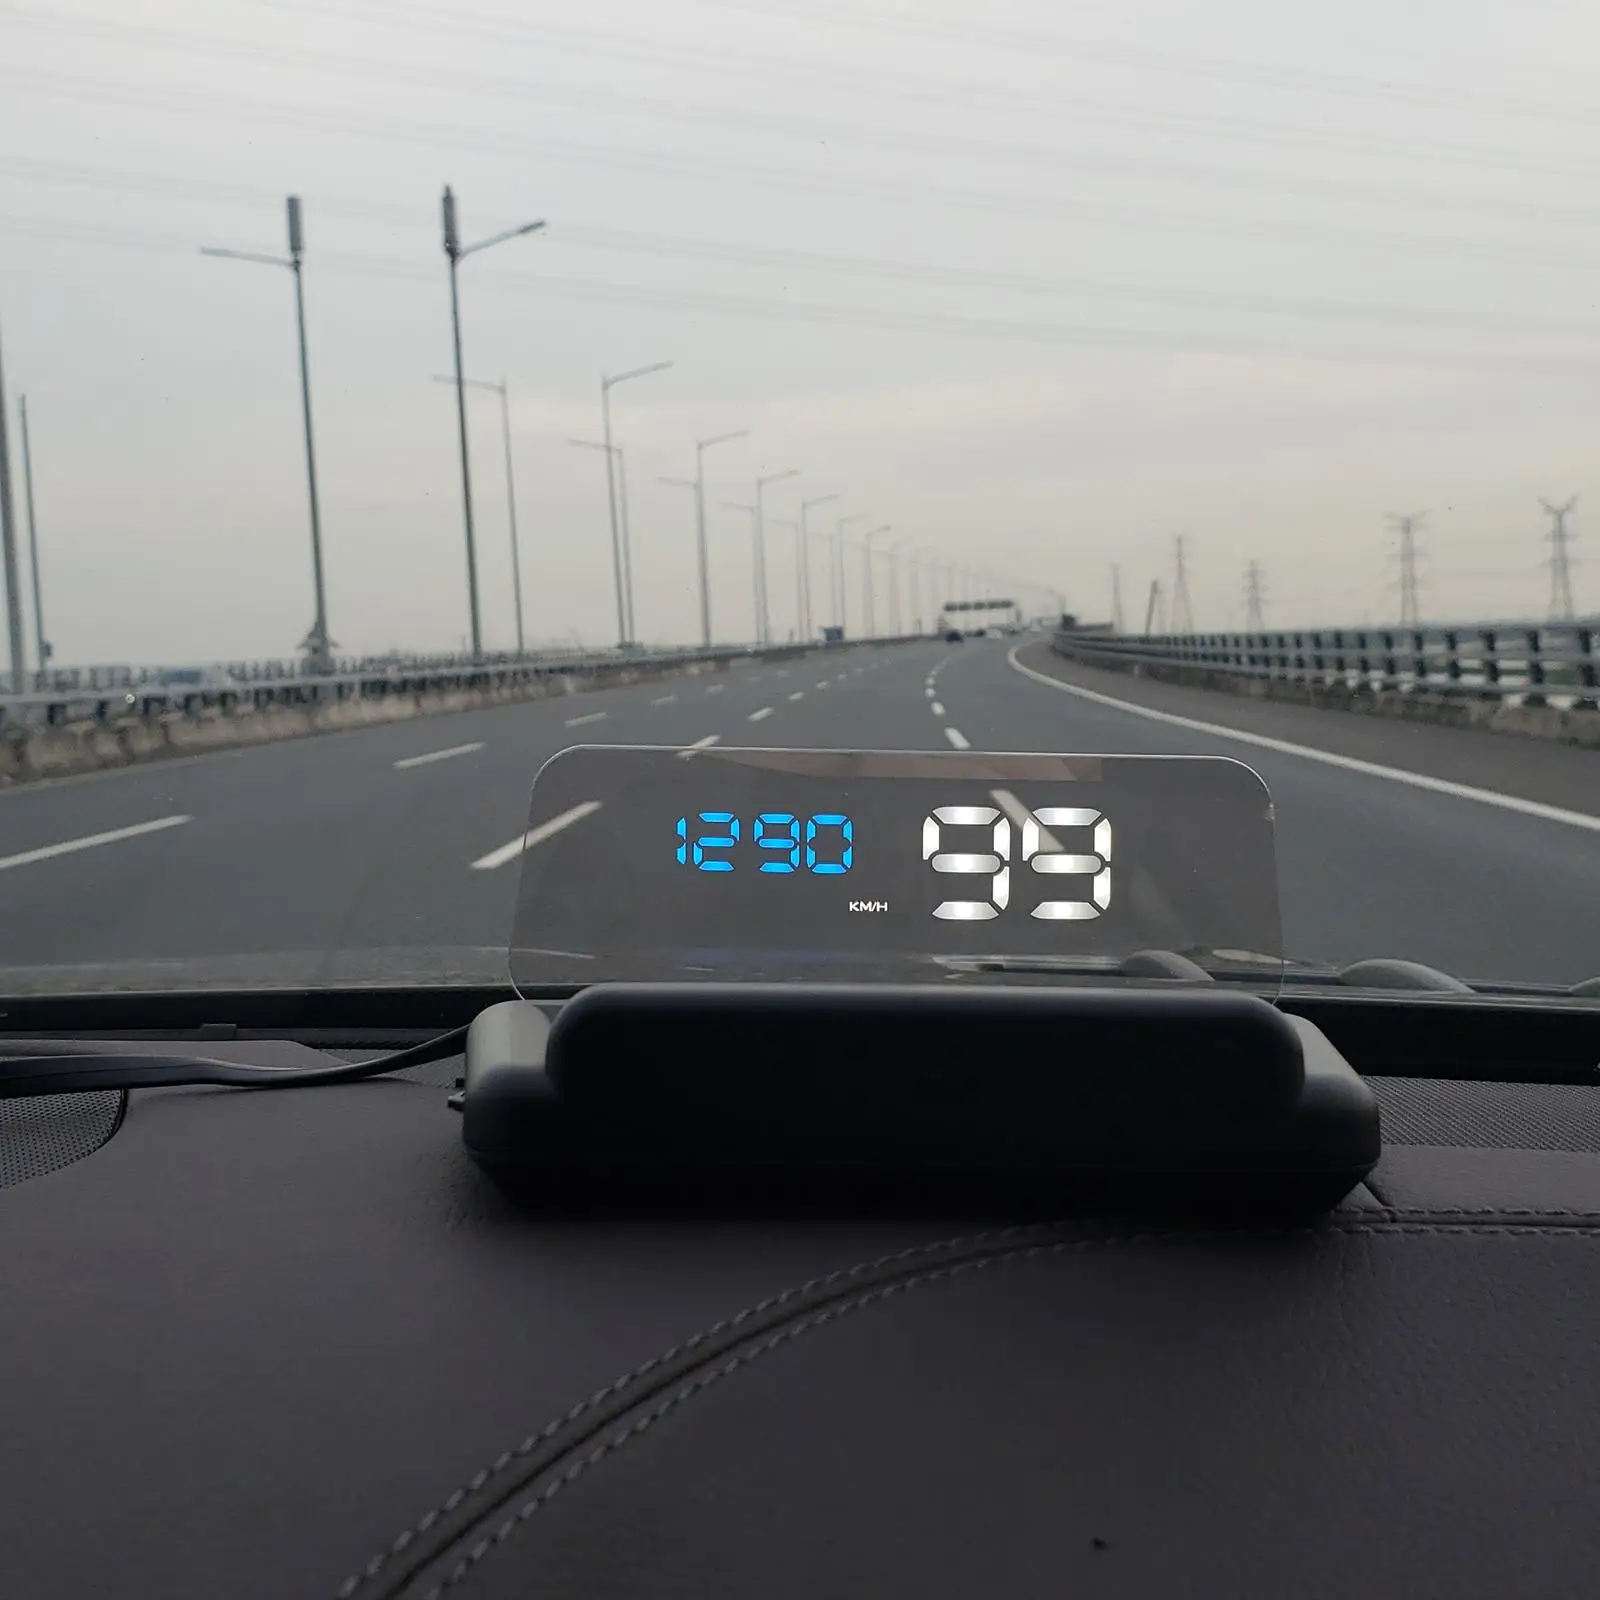  Display, Universal Fatigue Driving ,   Alarm,  Projector, Odometer,  Cars with 